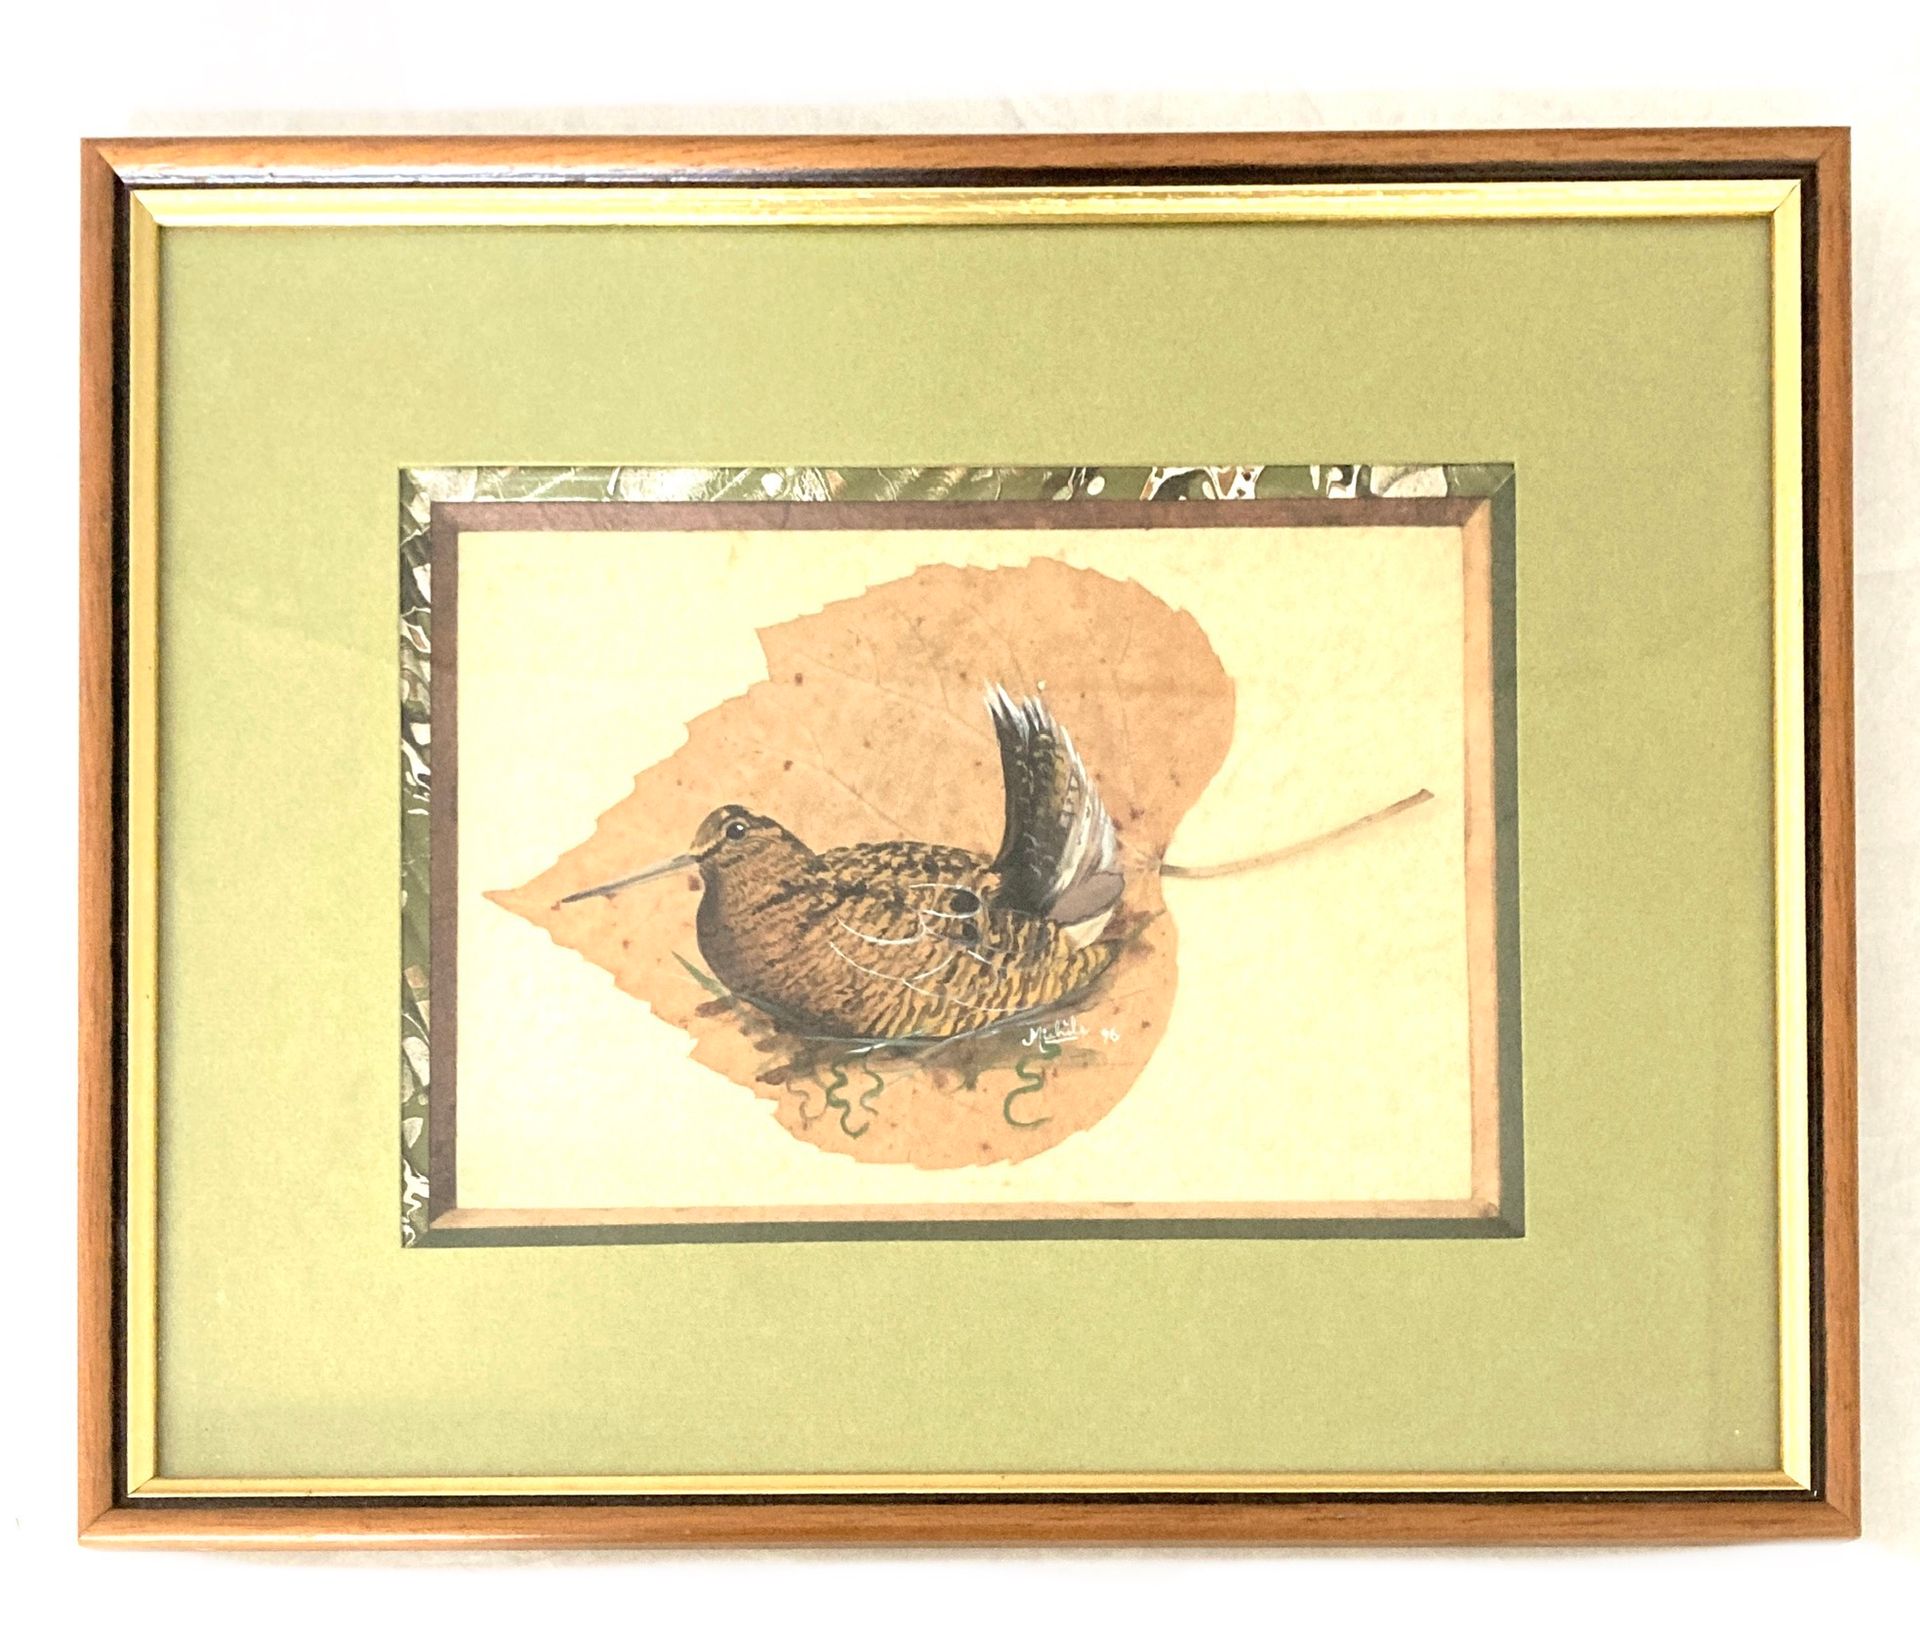 Null Gouache on dried mulberry leaf, woodcock, signed lower right "Michèle" and &hellip;